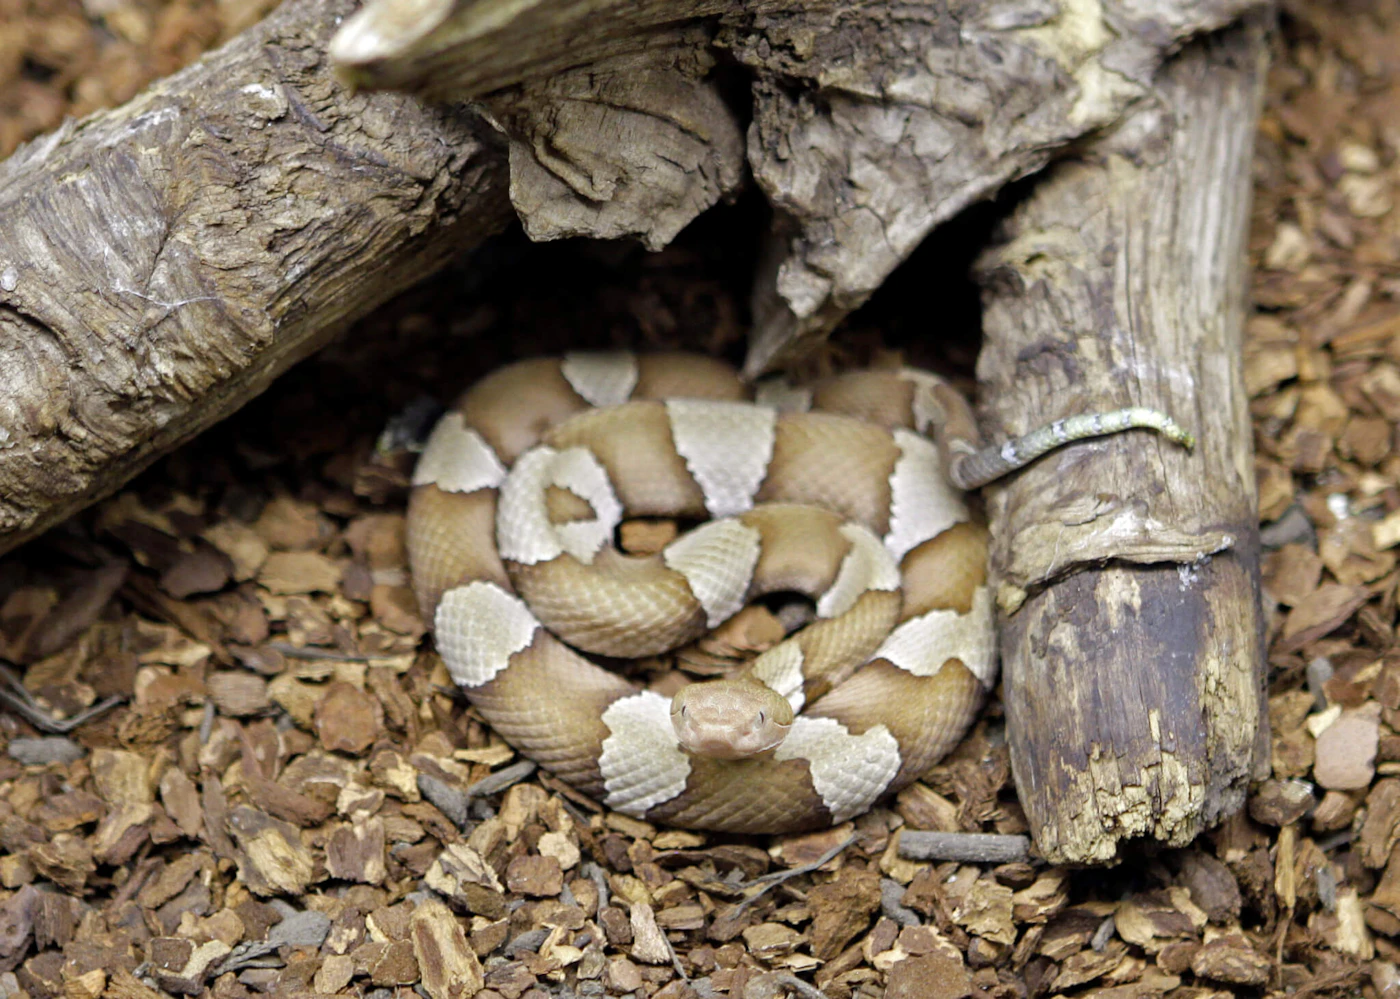 A copperhead at the Nature Museum in Charlotte, N.C. (AP Photo/Chuck Burton)